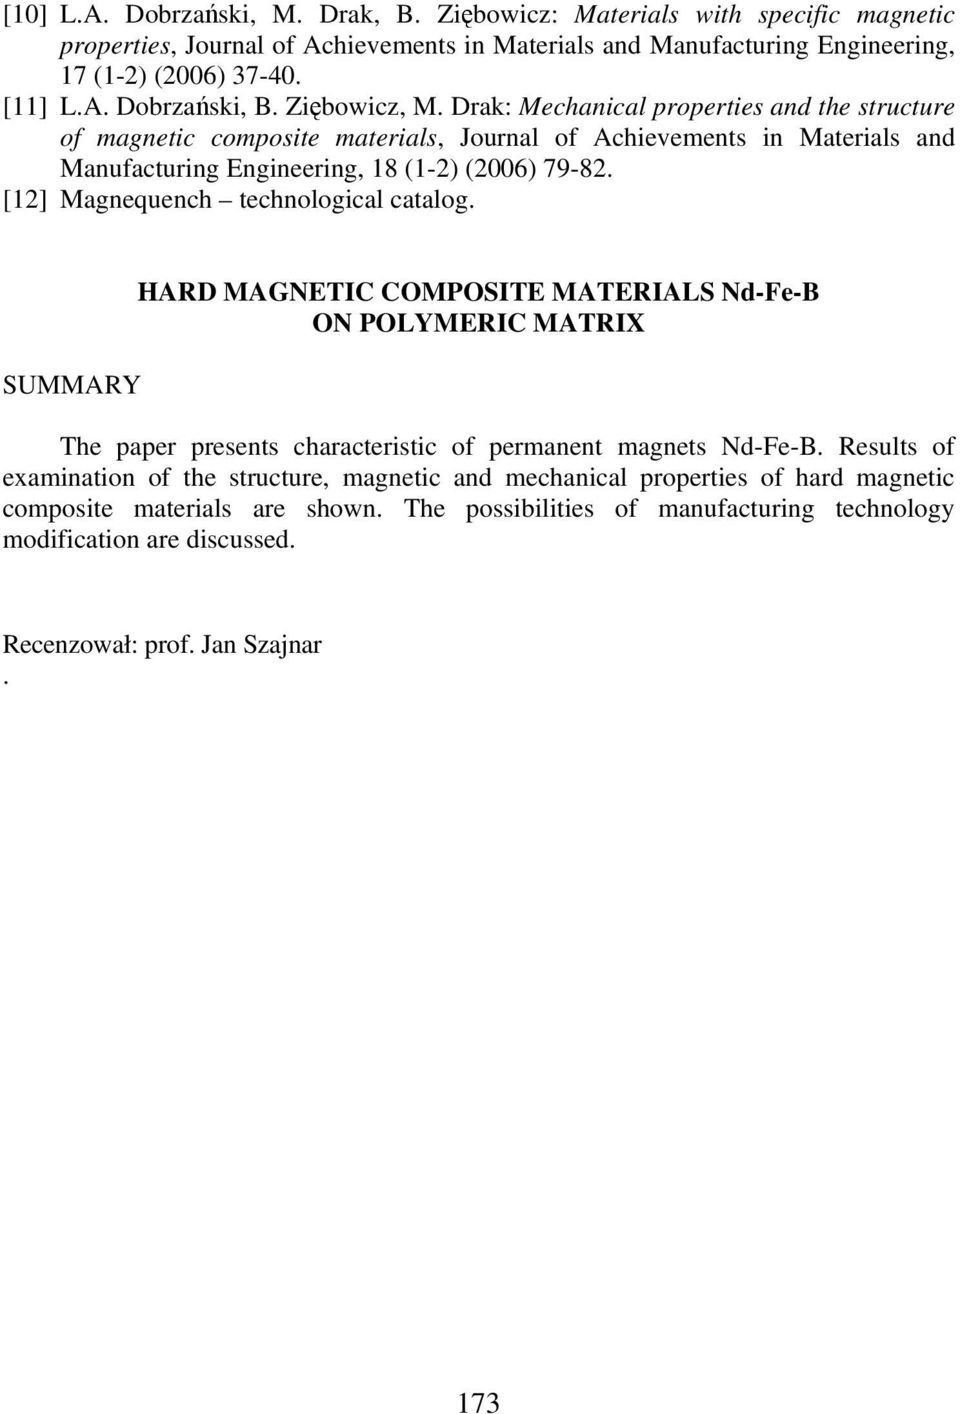 [12] Magnequench technological catalog. SUMMARY HARD MAGNETIC COMPOSITE MATERIALS Nd-Fe-B ON POLYMERIC MATRIX The paper presents characteristic of permanent magnets Nd-Fe-B.